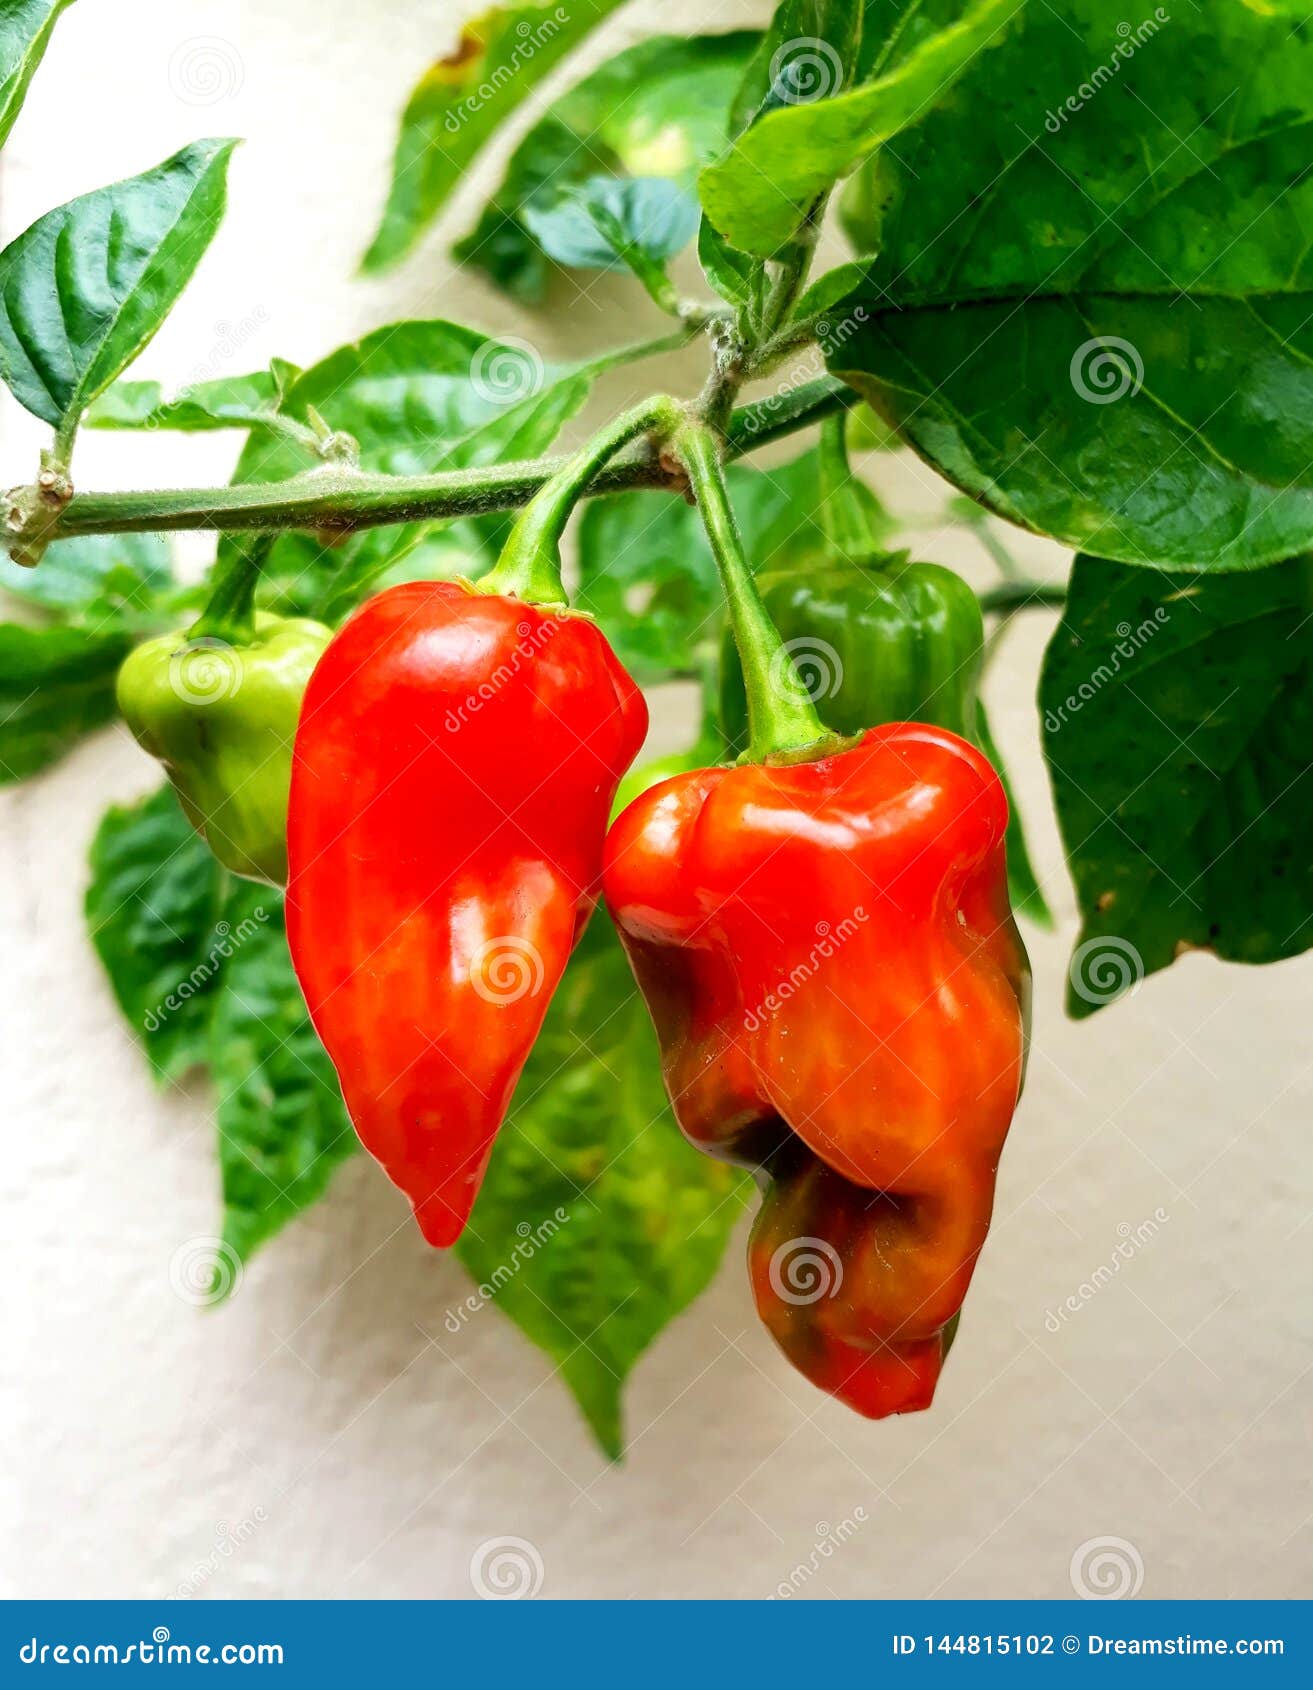 what do ghost peppers look like when ripe